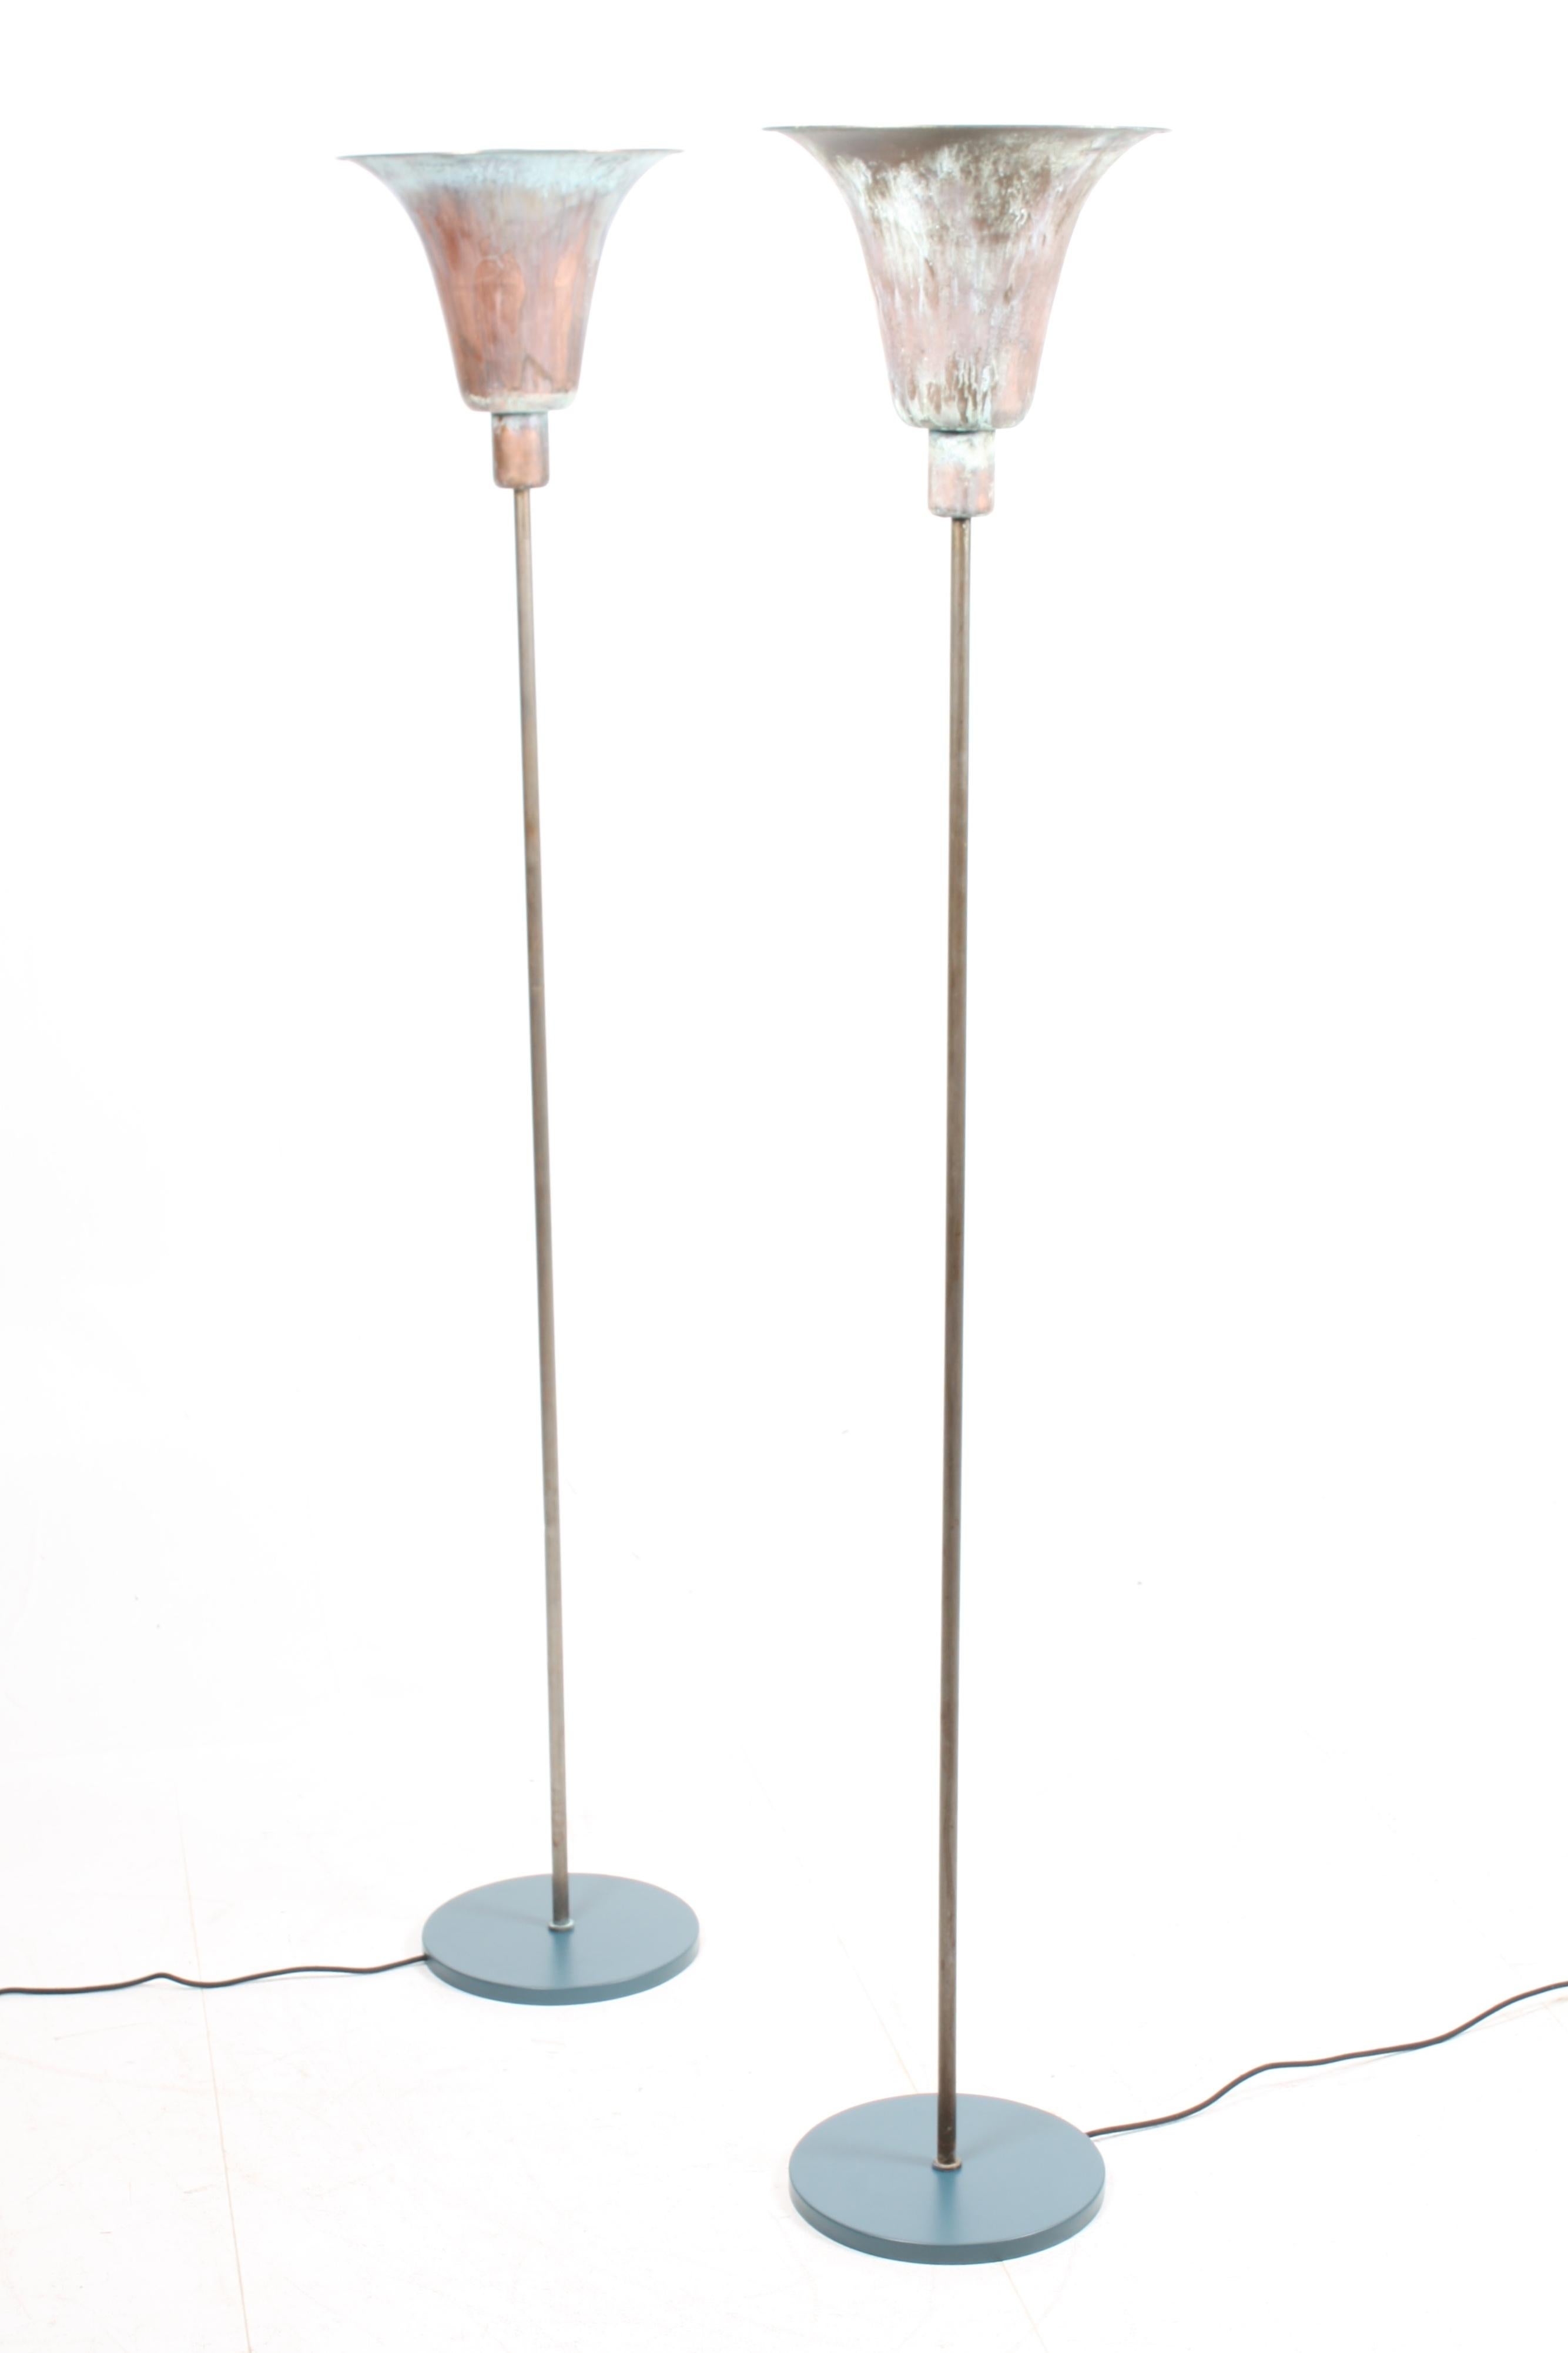 Danish Pair of Uplights in Painted Copper, Designed in 1940s by Louis Poulsen